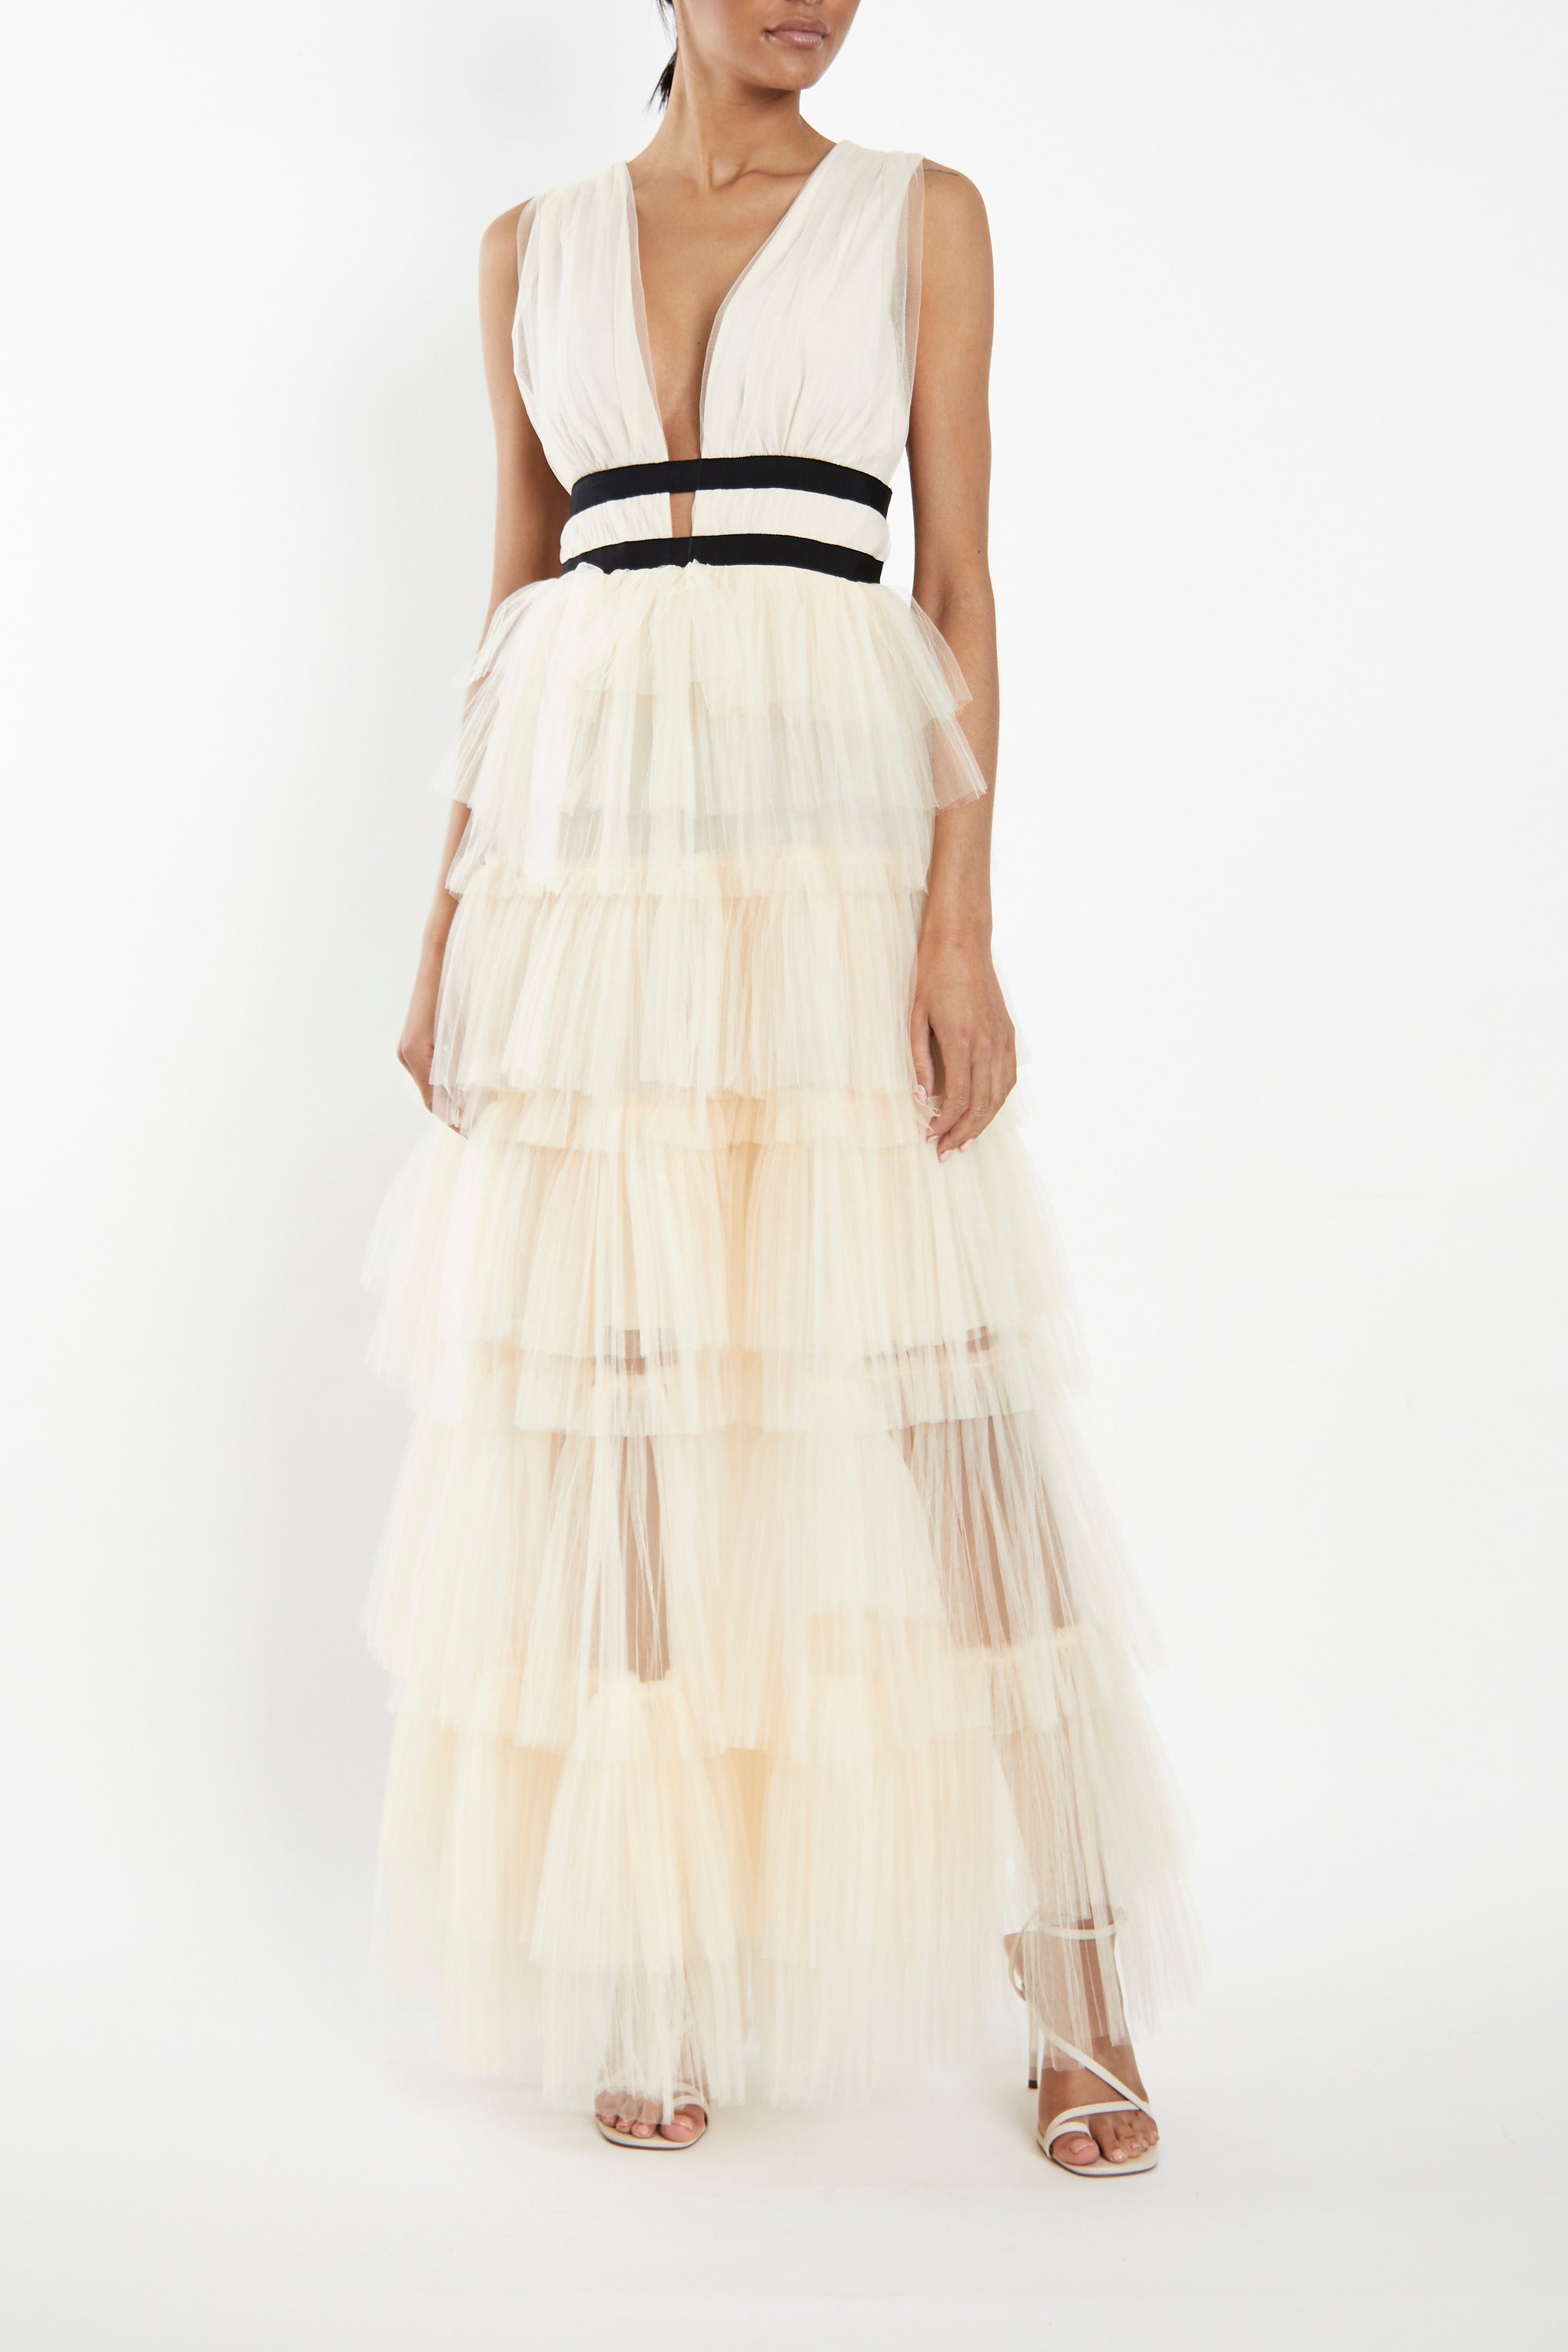 Eliza Pearl Plunging Neck Layered Tulle Skirt Maxi-Dress-image-1